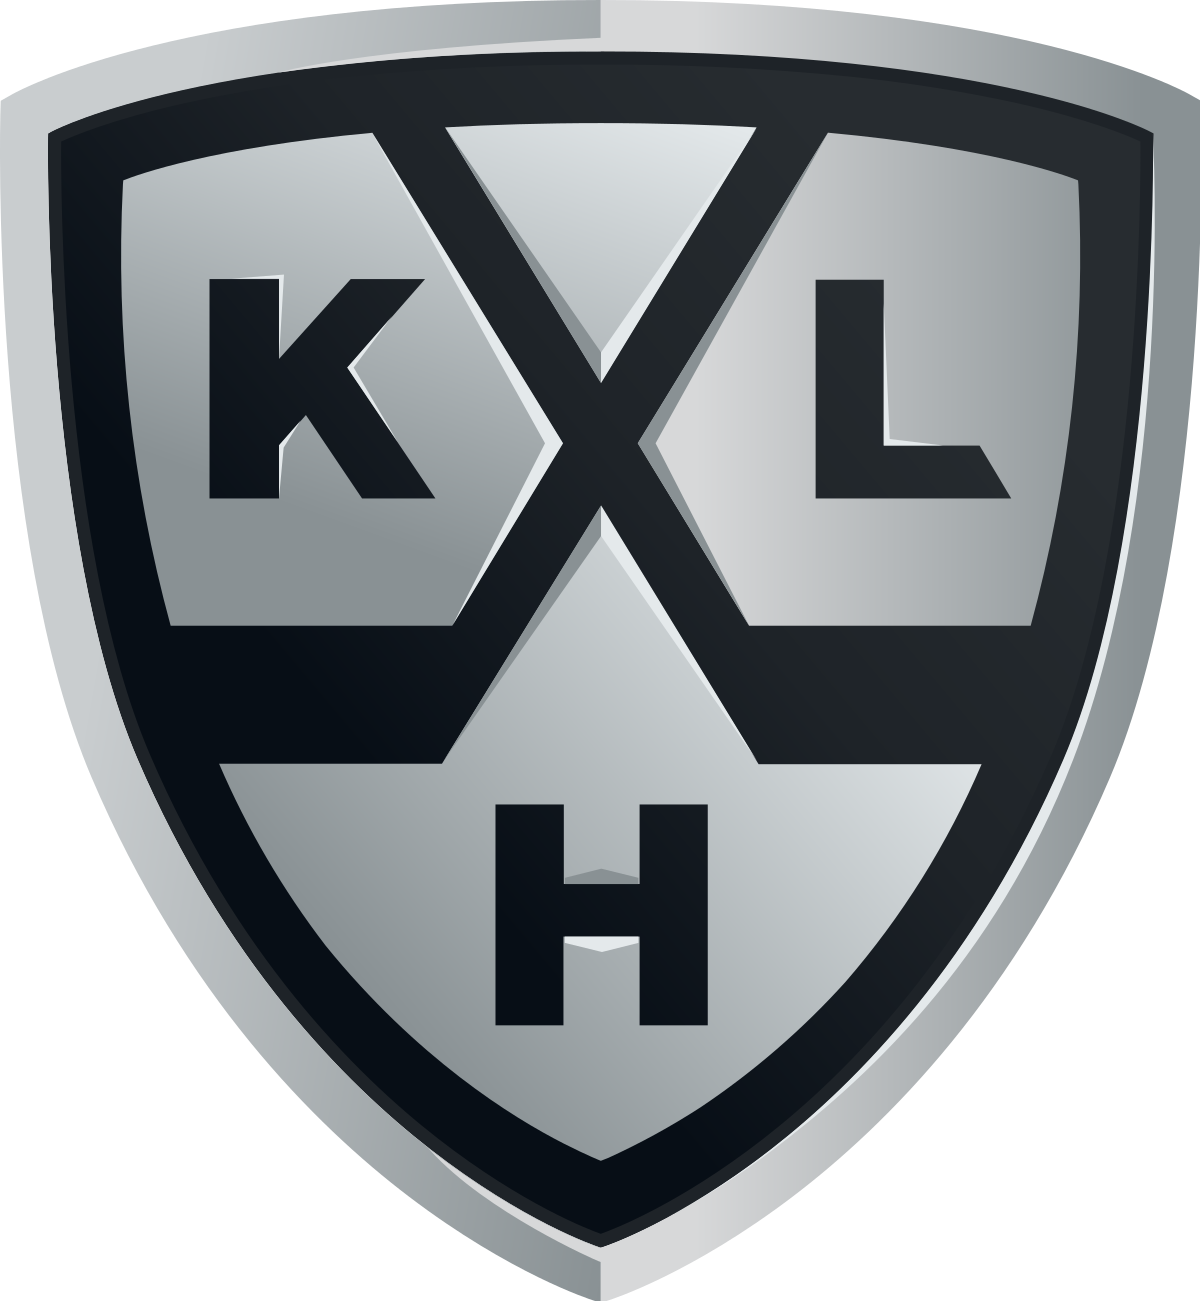 KHL removes two clubs from the league in cost-cutting measures